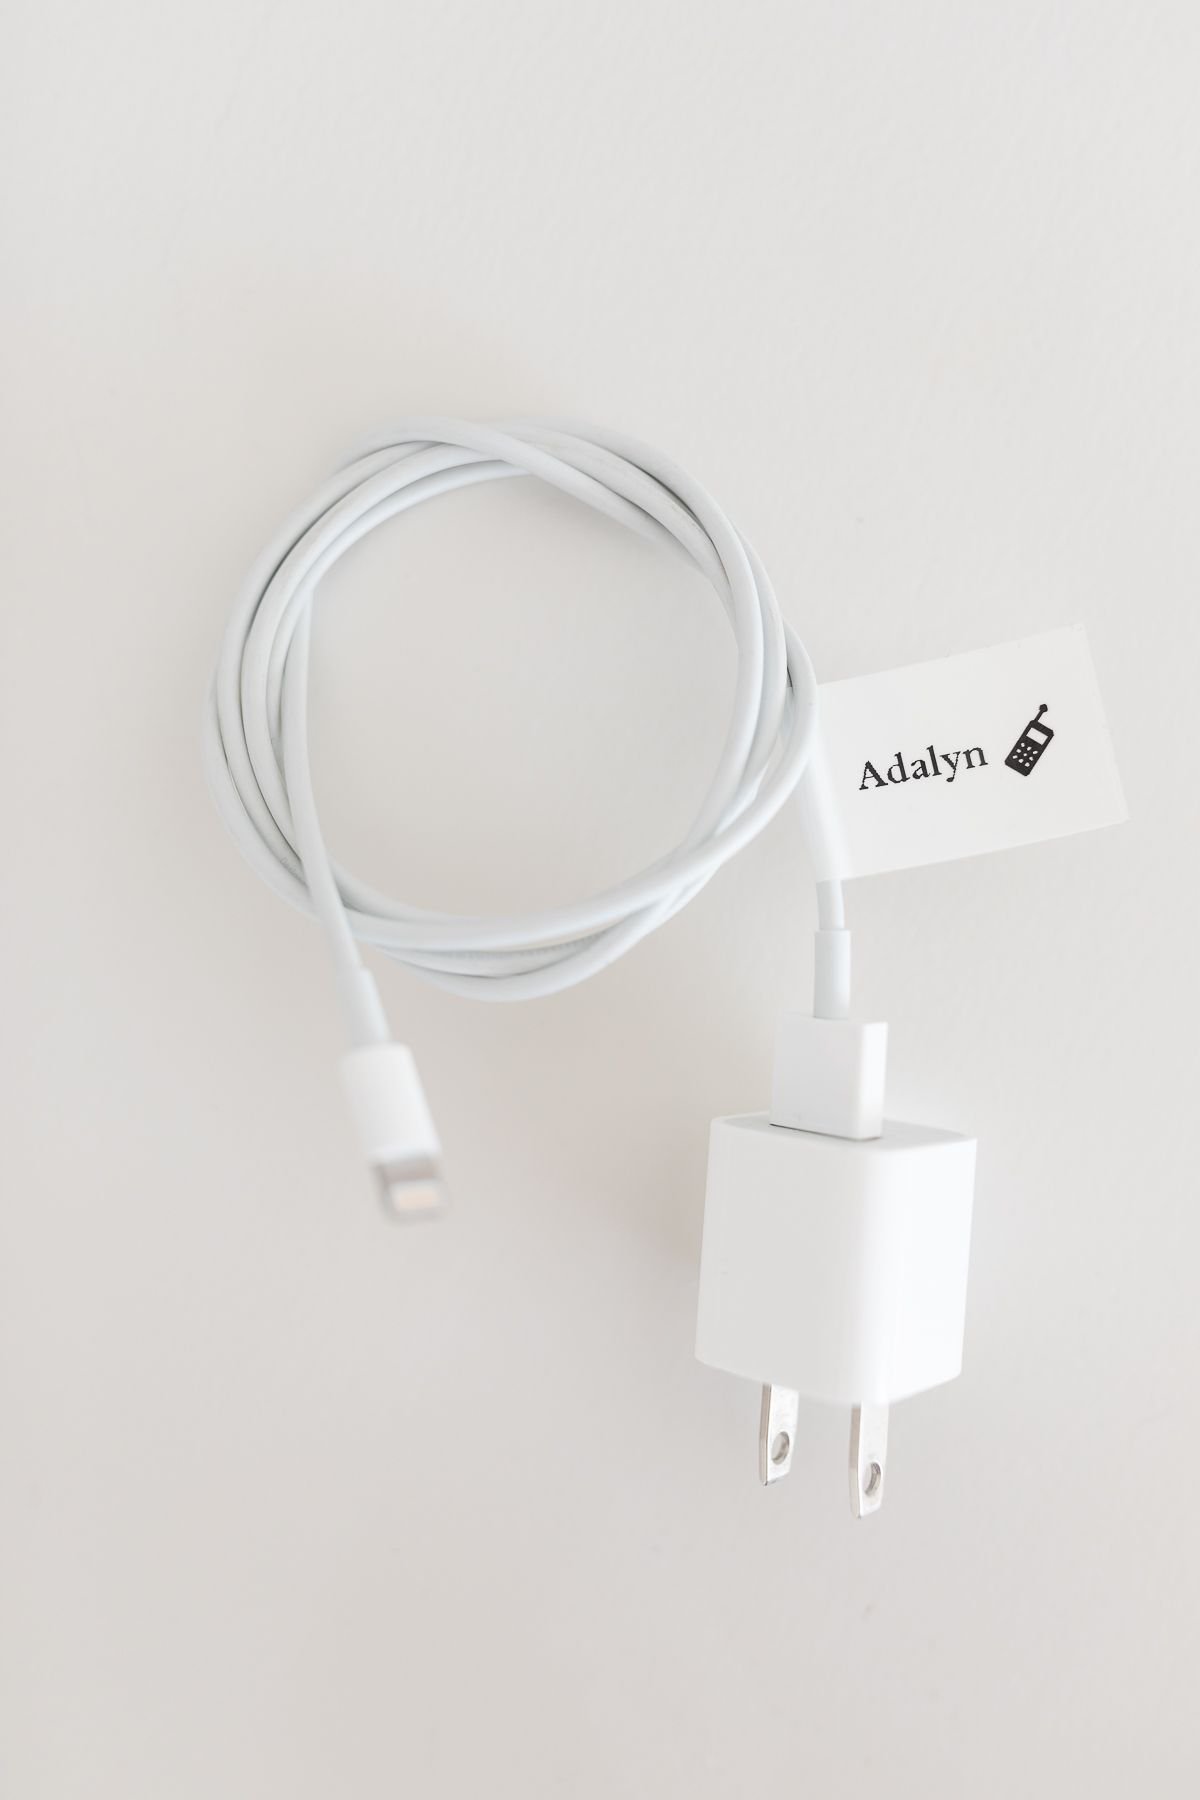 A white phone charger cord with a label for the organization of the bedside table